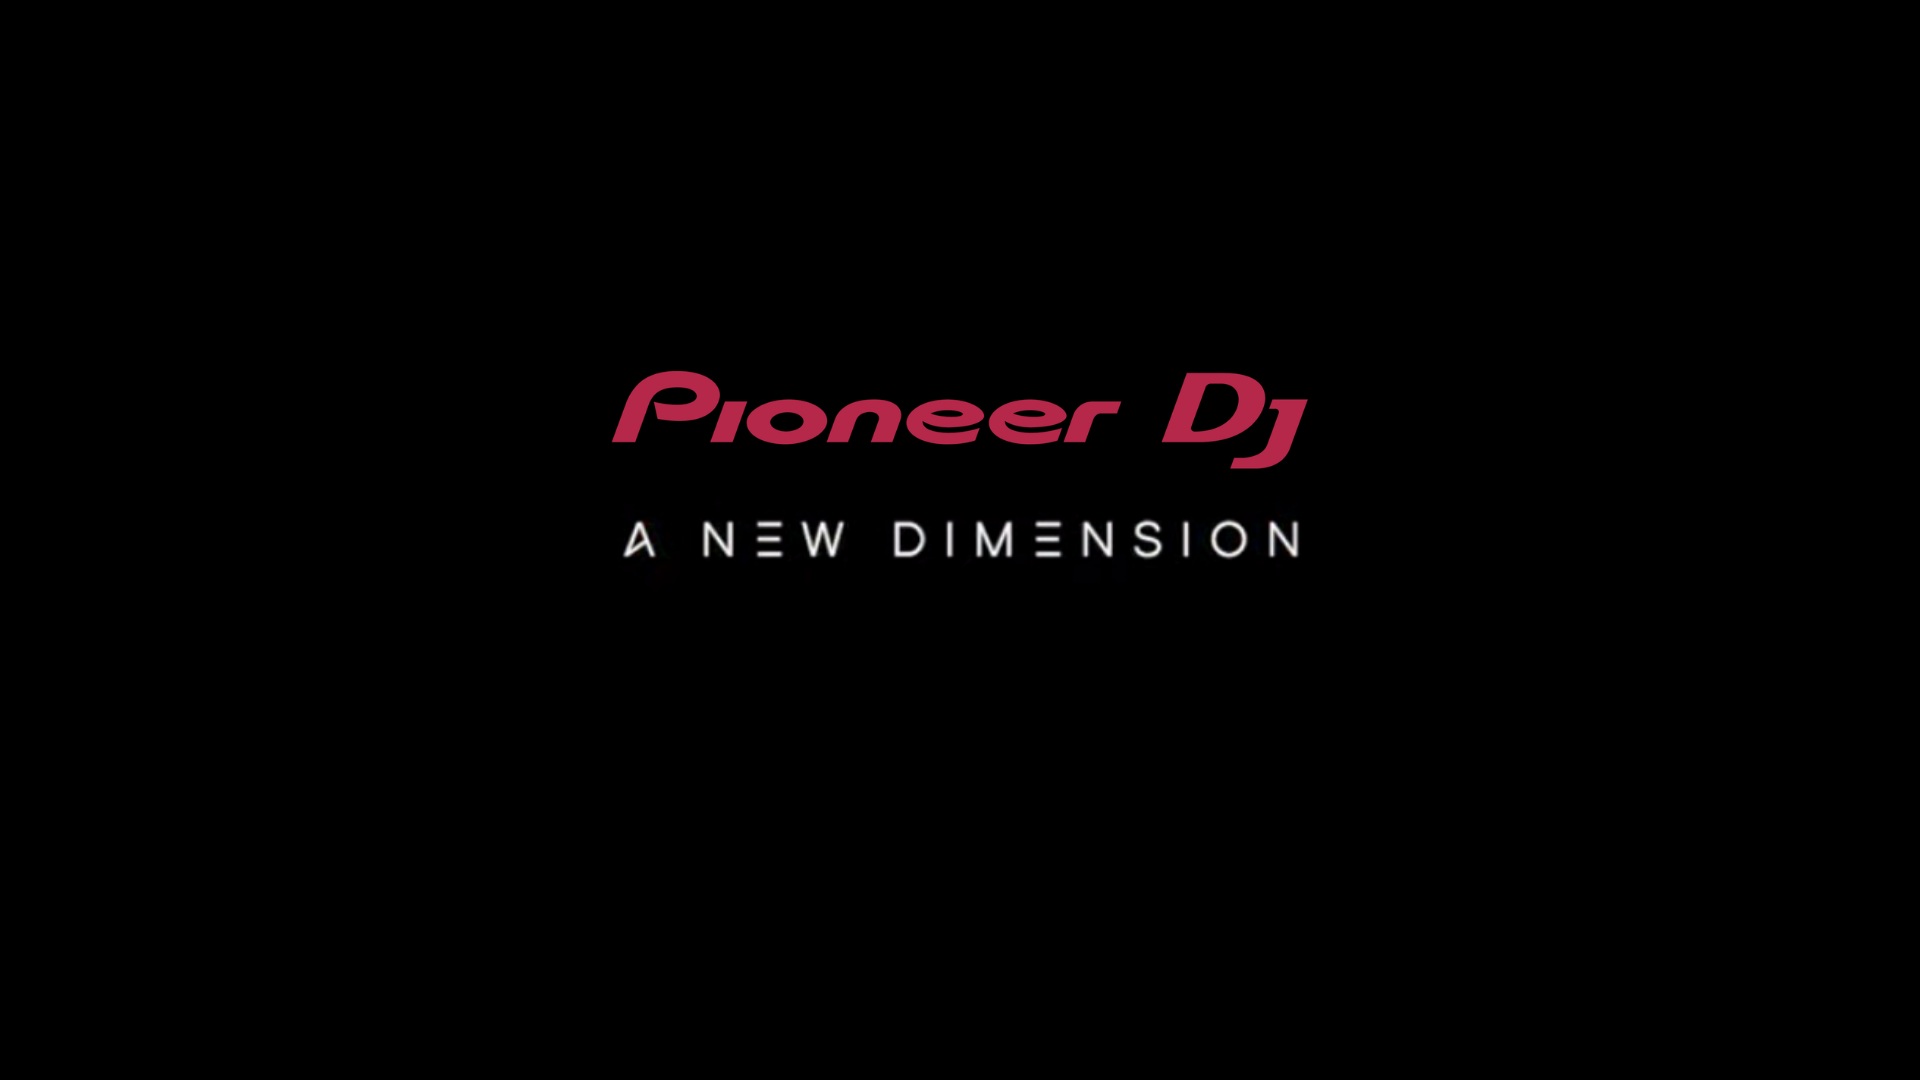 We’ve decoded the mysterious new offering from Pioneer, could this be the new CDJ 3000?